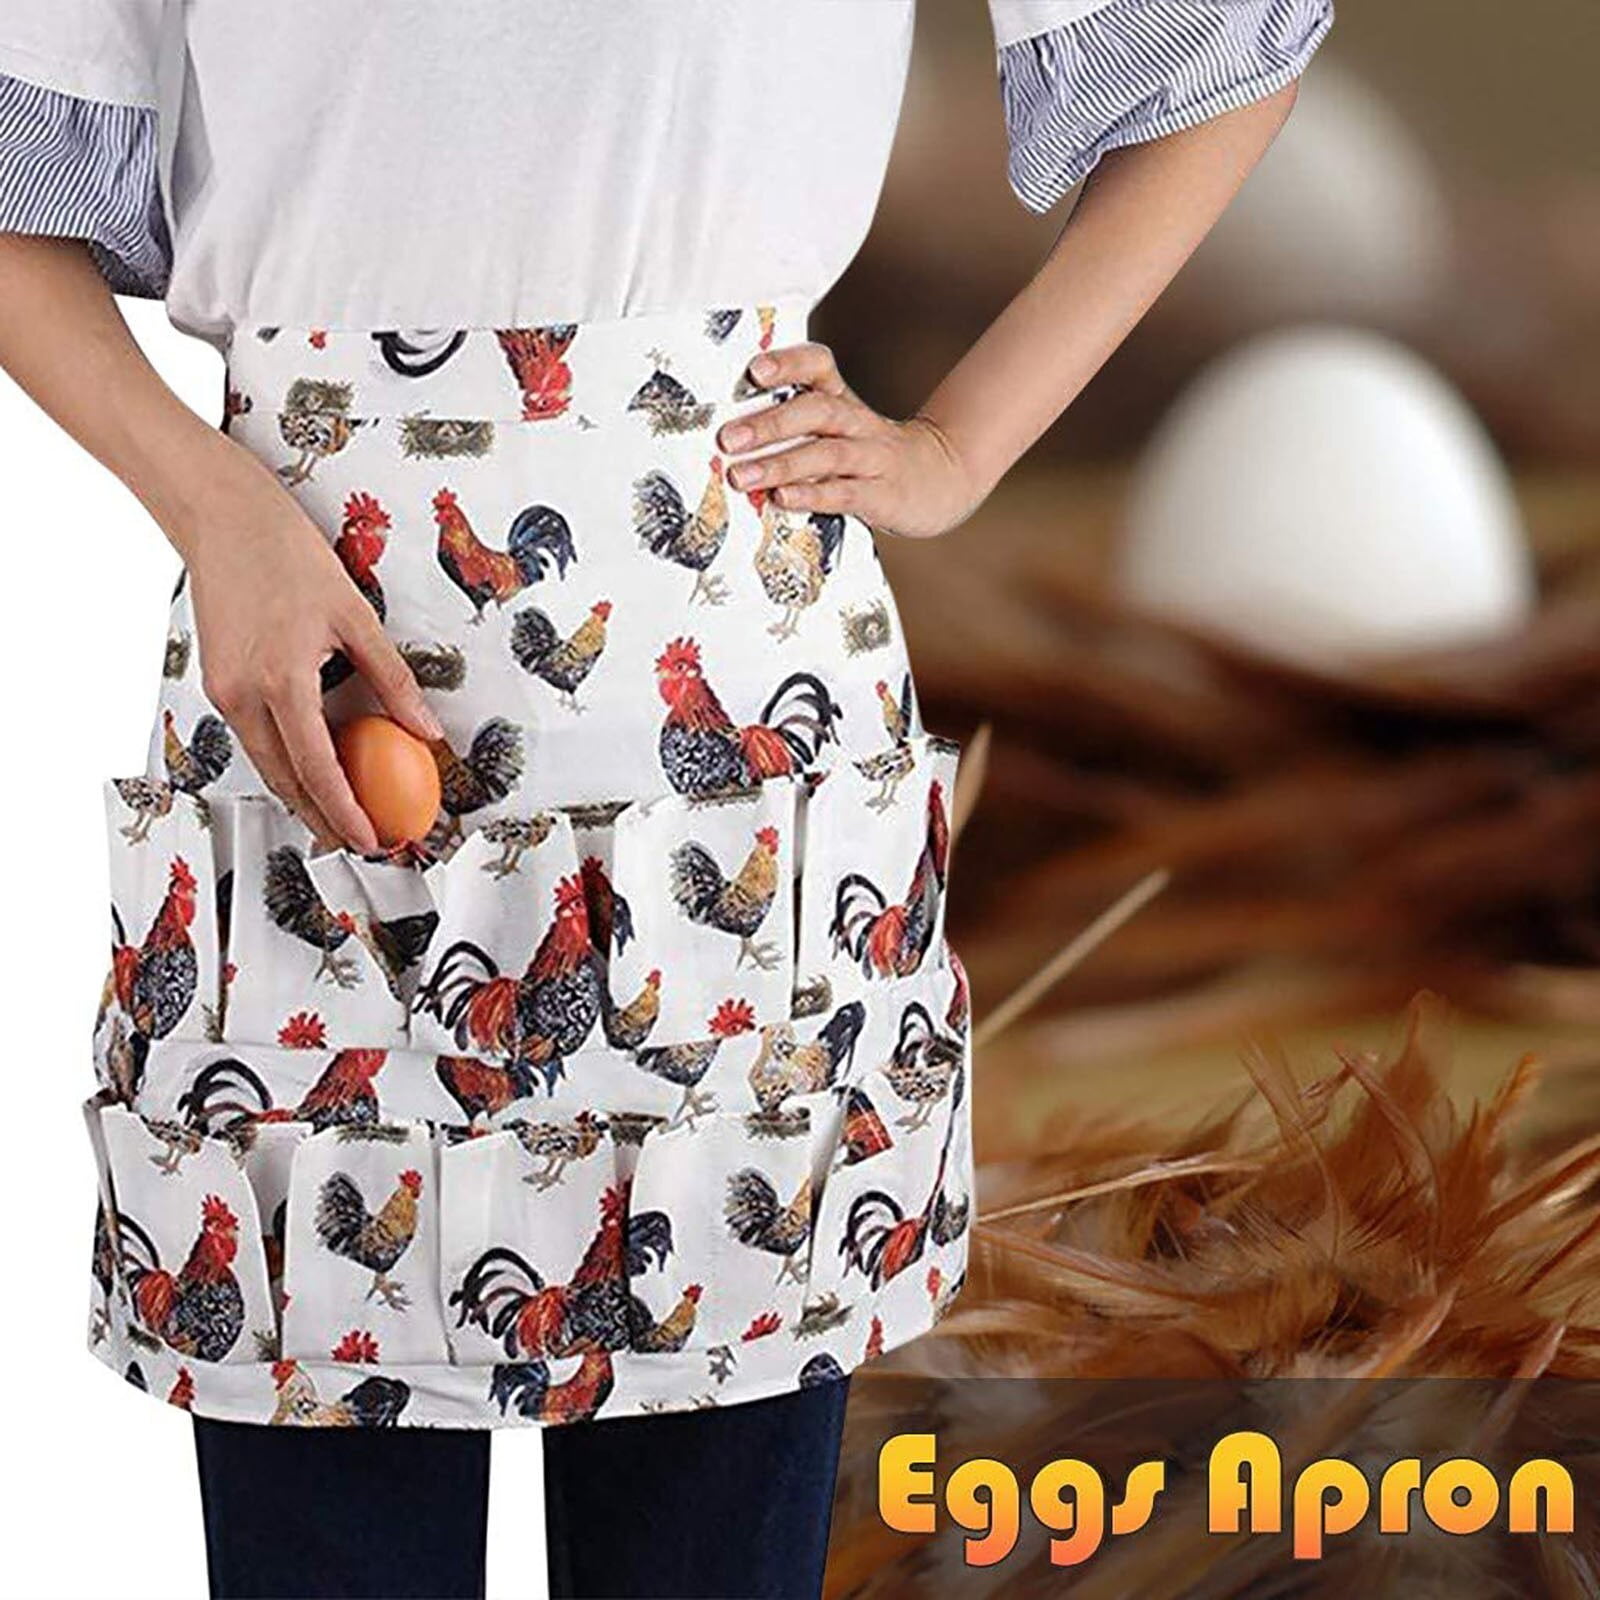 Foxyoo Egg Apron for Fresh Eggs,Egg Collecting Apron with Deep  Pockets,Chicken Egg Apron for Women,Egg Baskets Holder Apron-Half Body Style